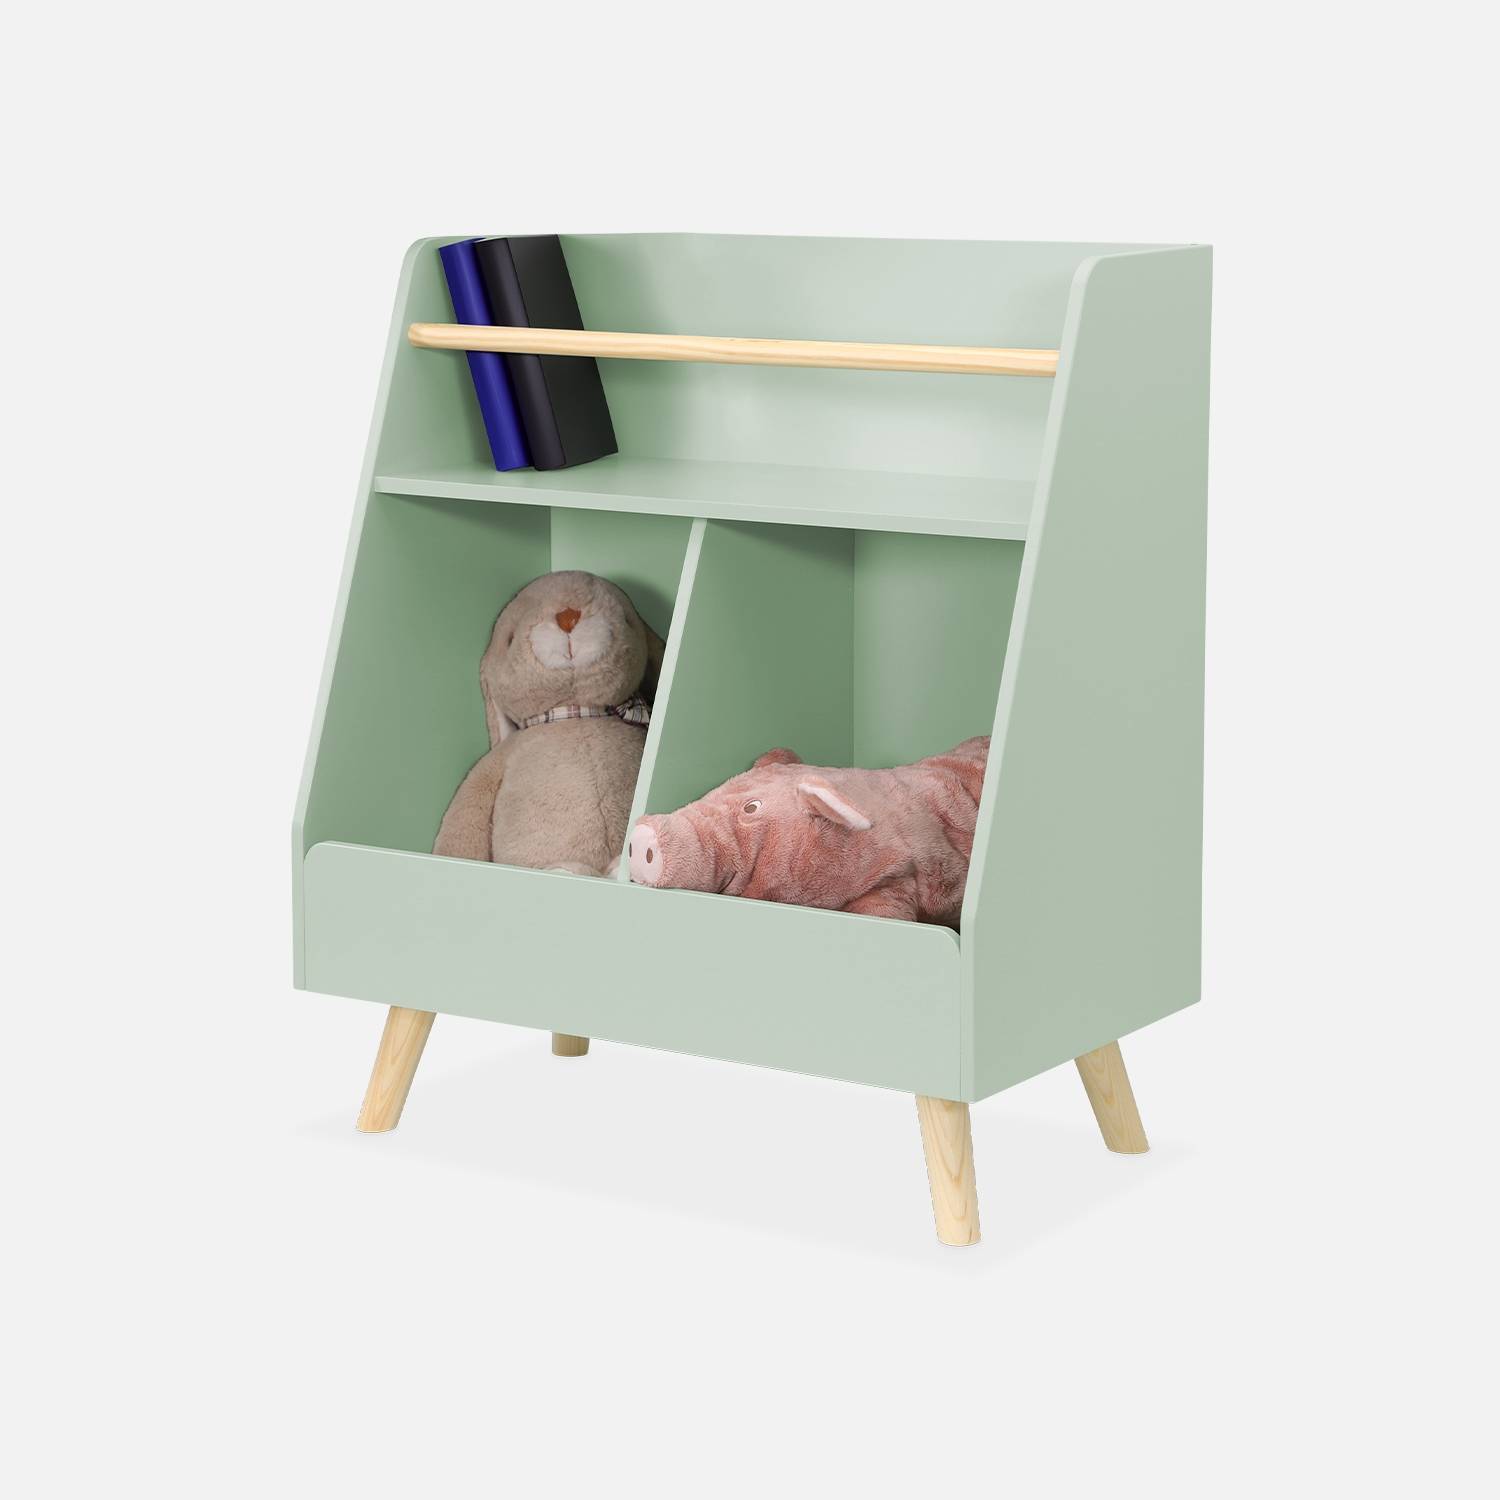 Children's storage unit with 2 compartments, Green